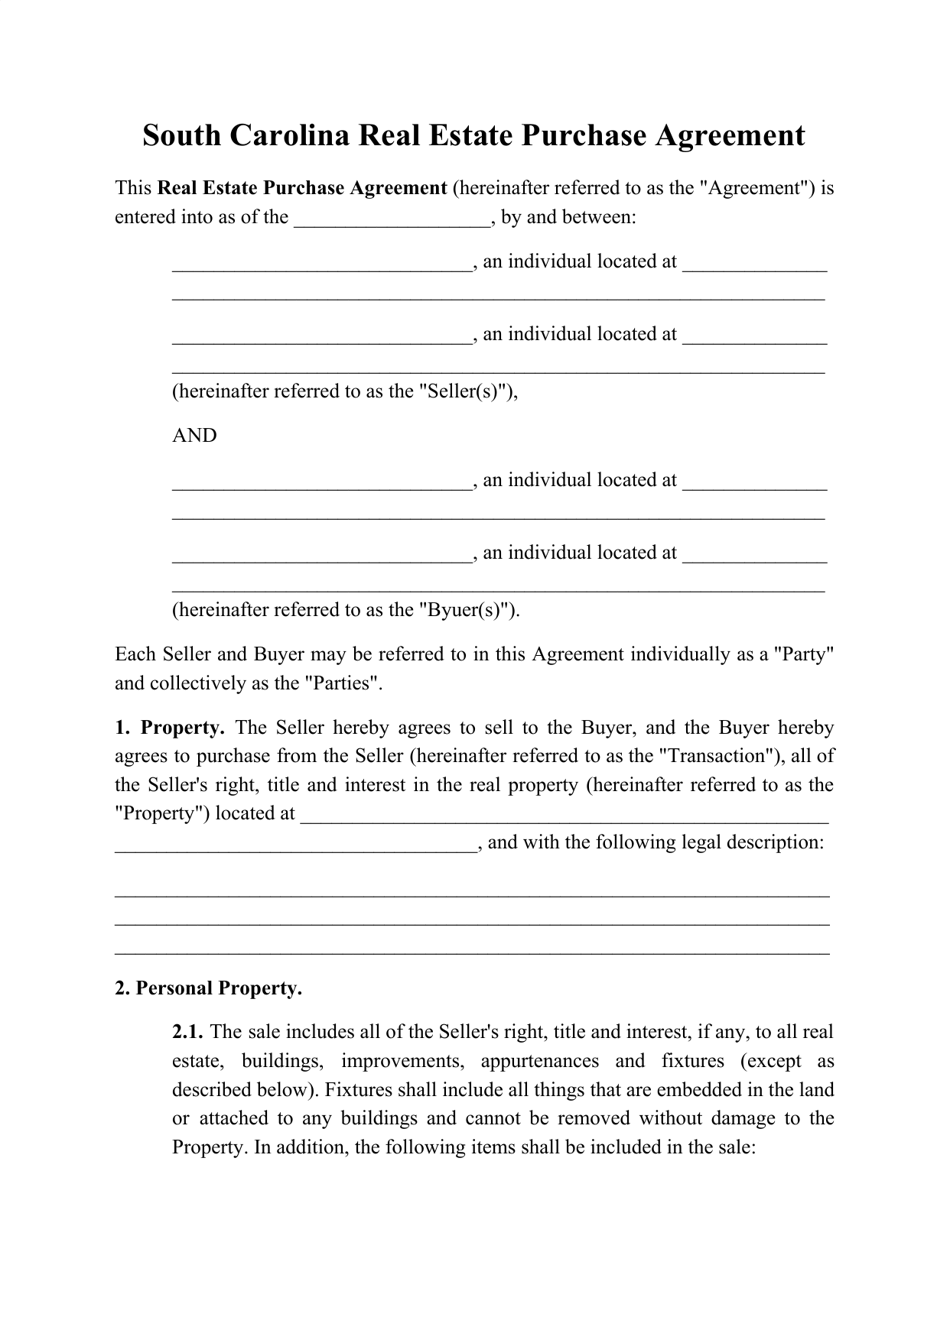 Real Estate Purchase Agreement Template - South Carolina, Page 1